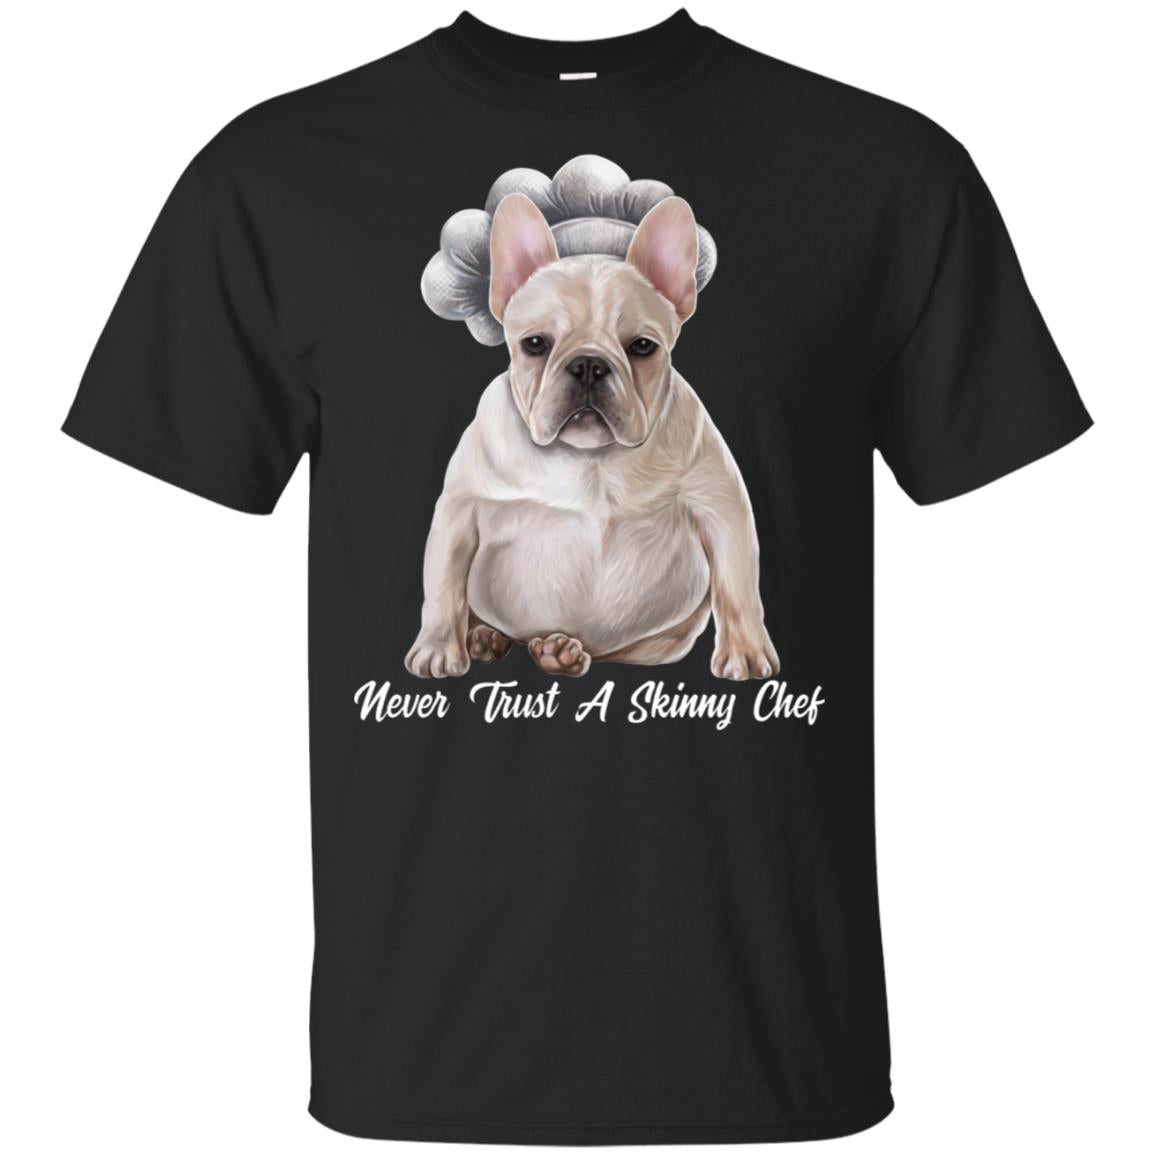 French Bulldog Shirt, Funny T-shirt, Never Trust A Skinny Chef - GoneBold.gift